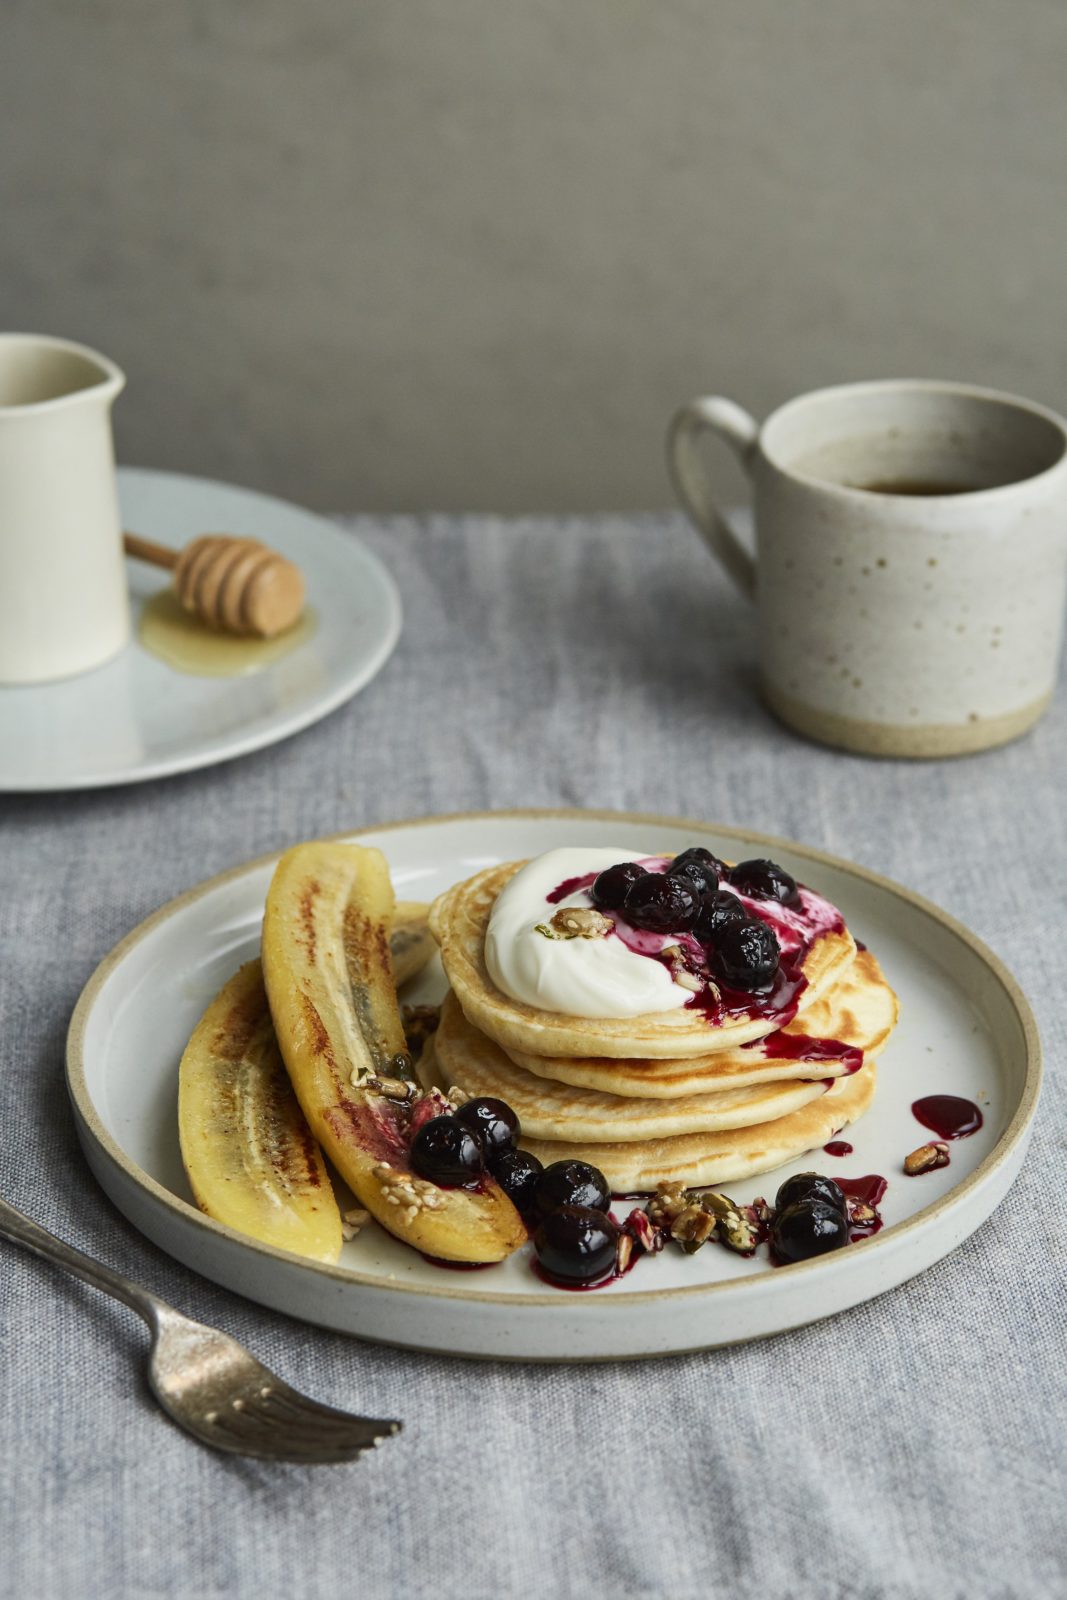 Banana and Blueberry Pancakes - Yorkshire Food & Drink